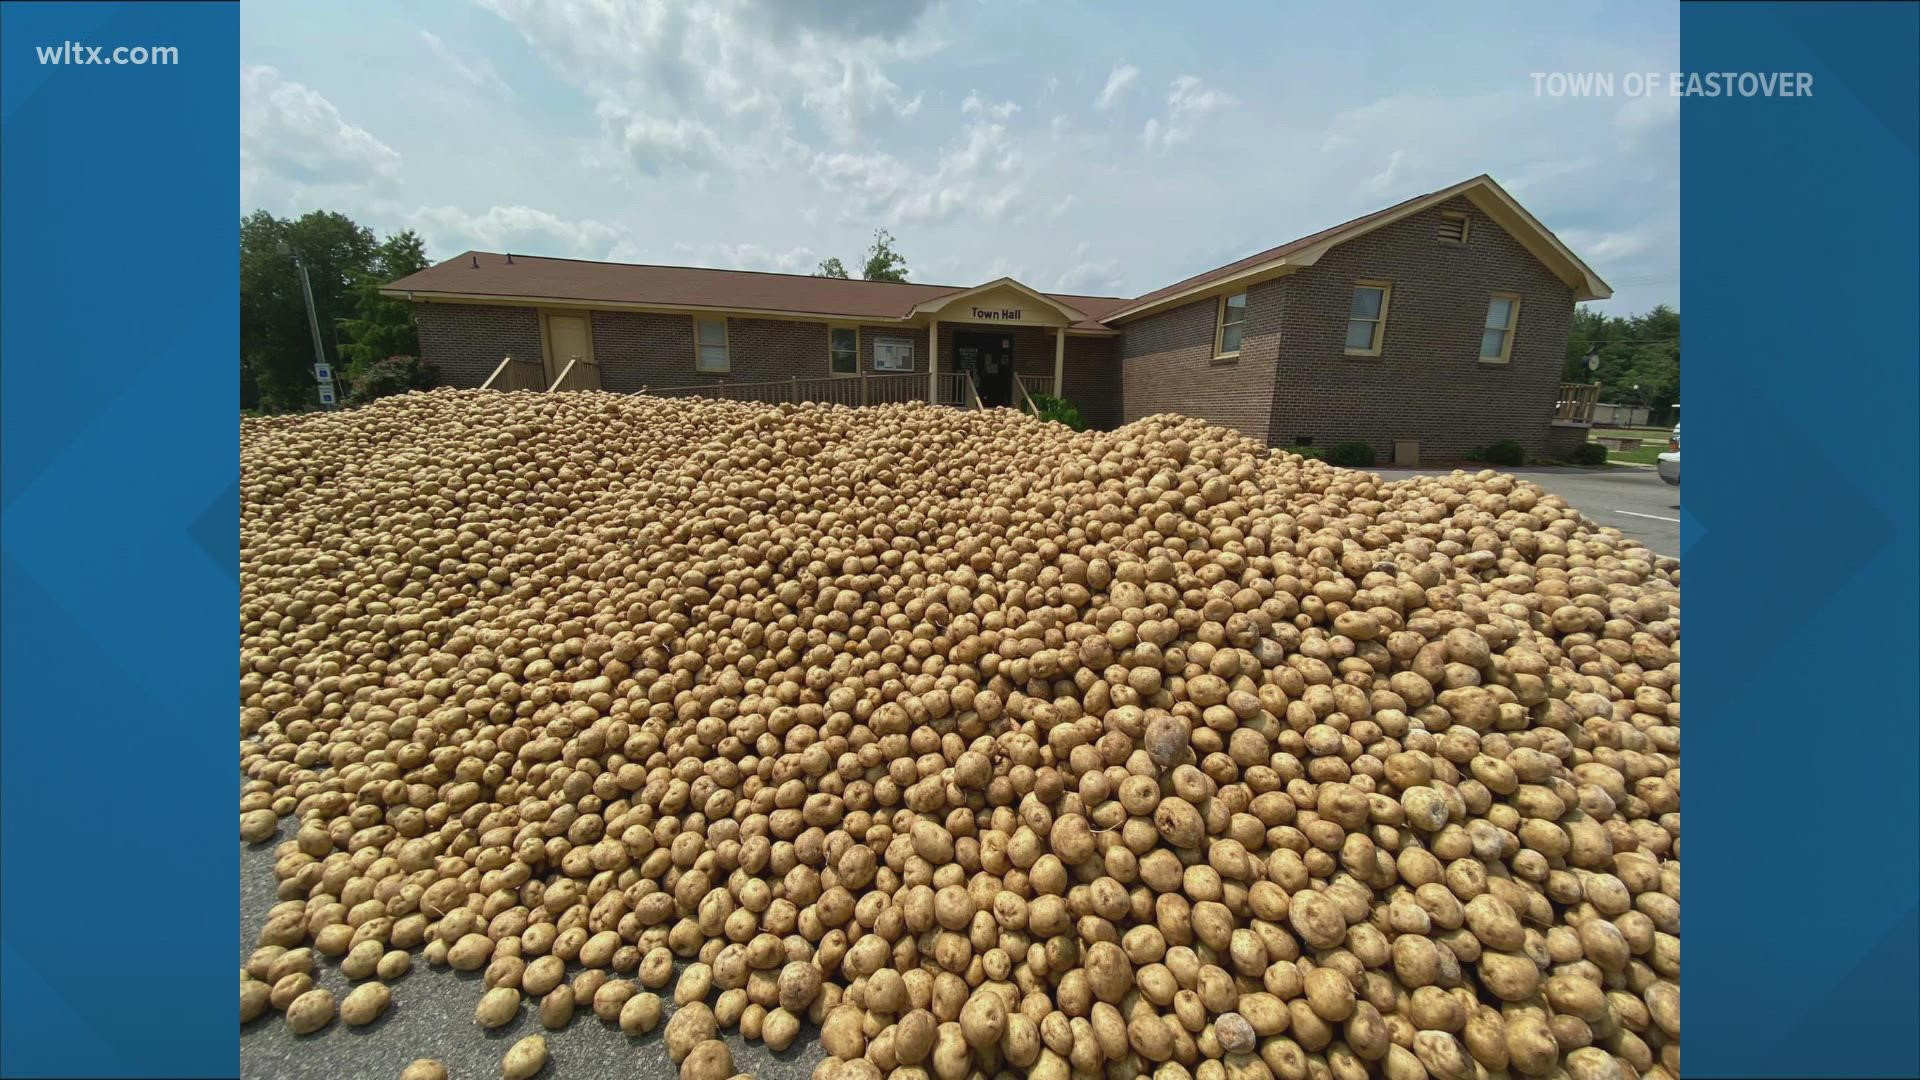 For the last day or so, the population of people living in Eastover, S.C. has been dwarfed - many times over - by the number of potatoes now calling it home.